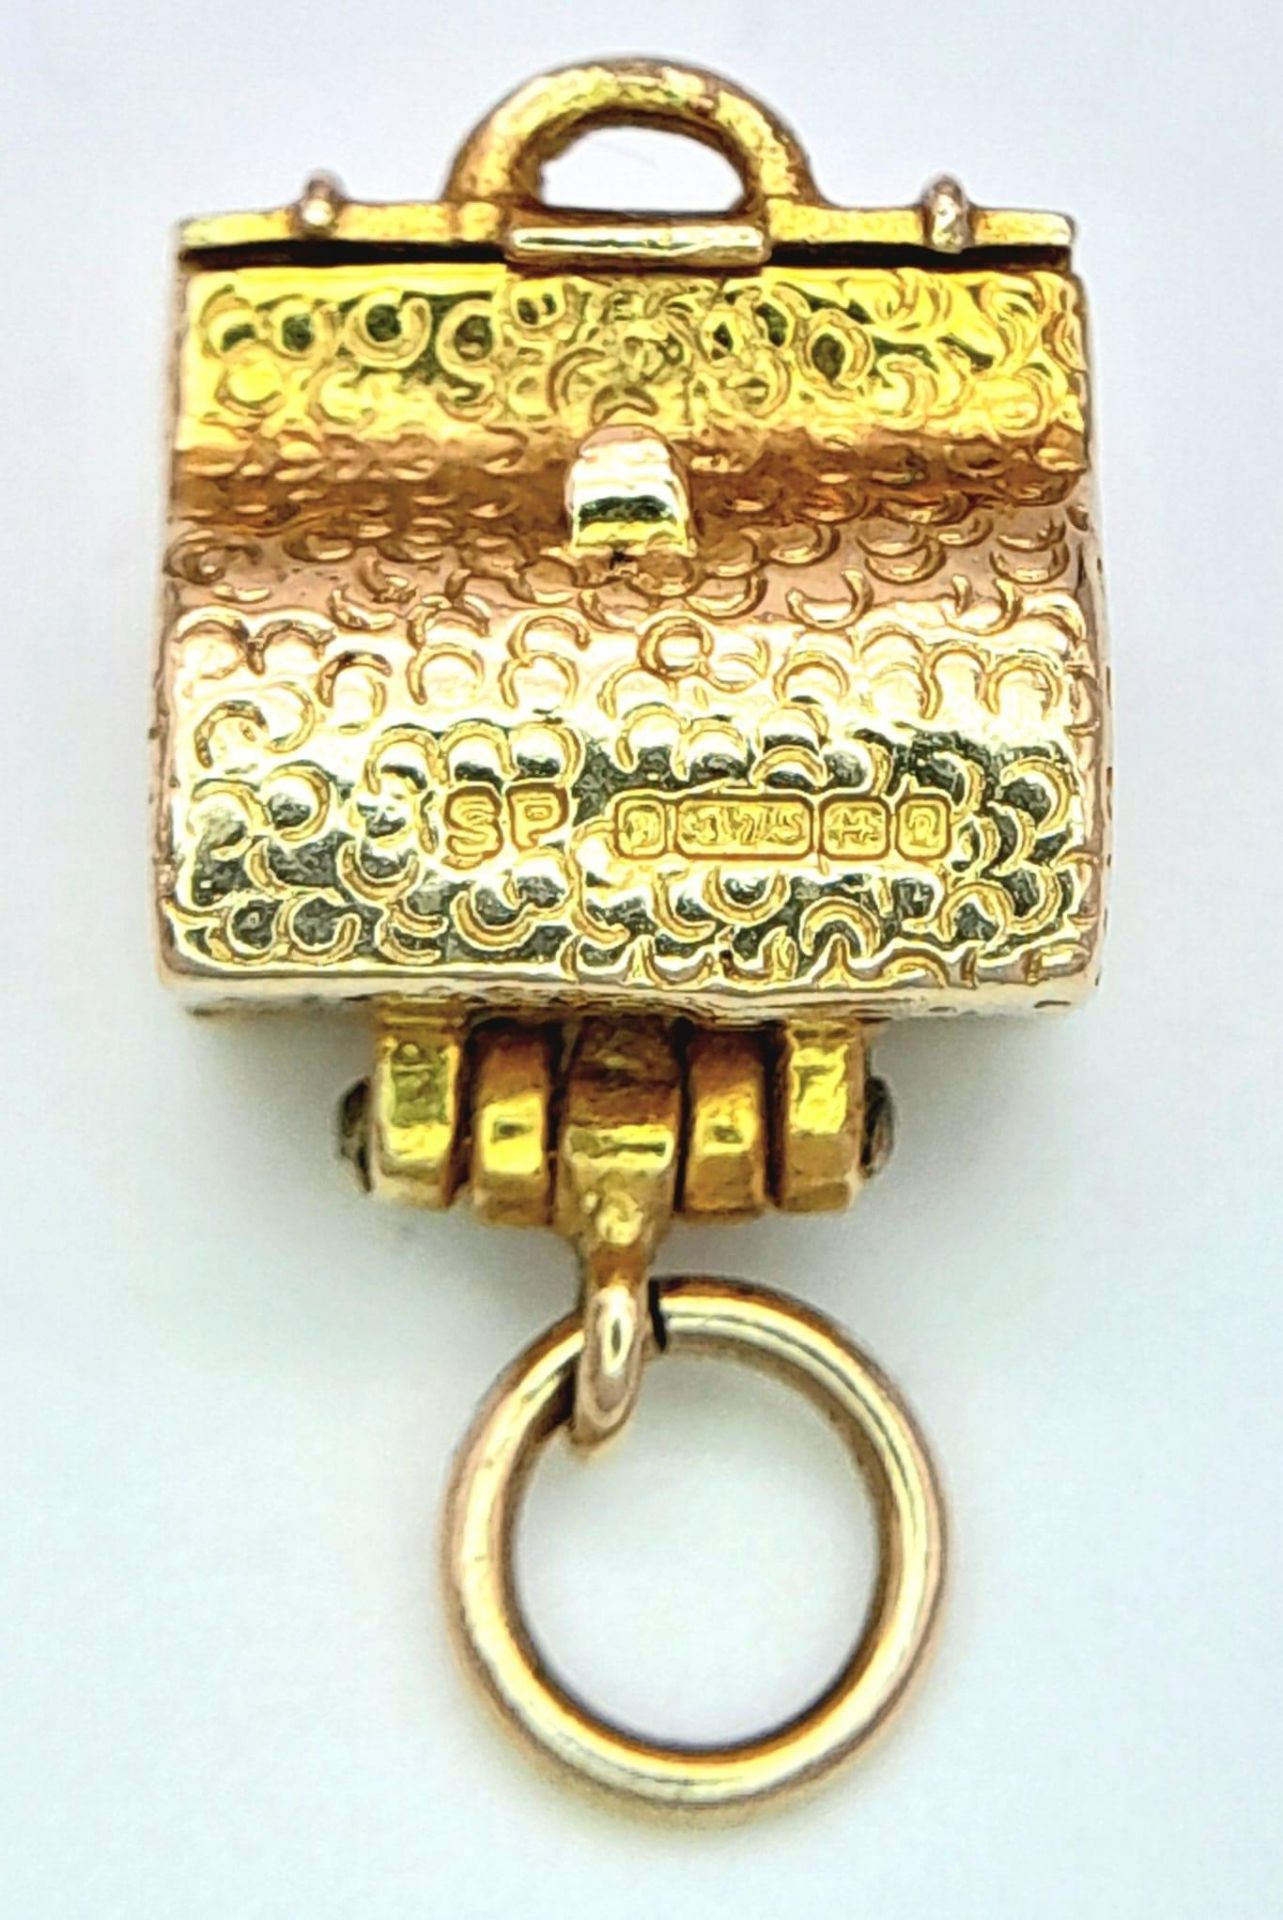 A 9K Yellow Gold Purse Pendant/Charm, which opens up, 3.2g - Image 2 of 6